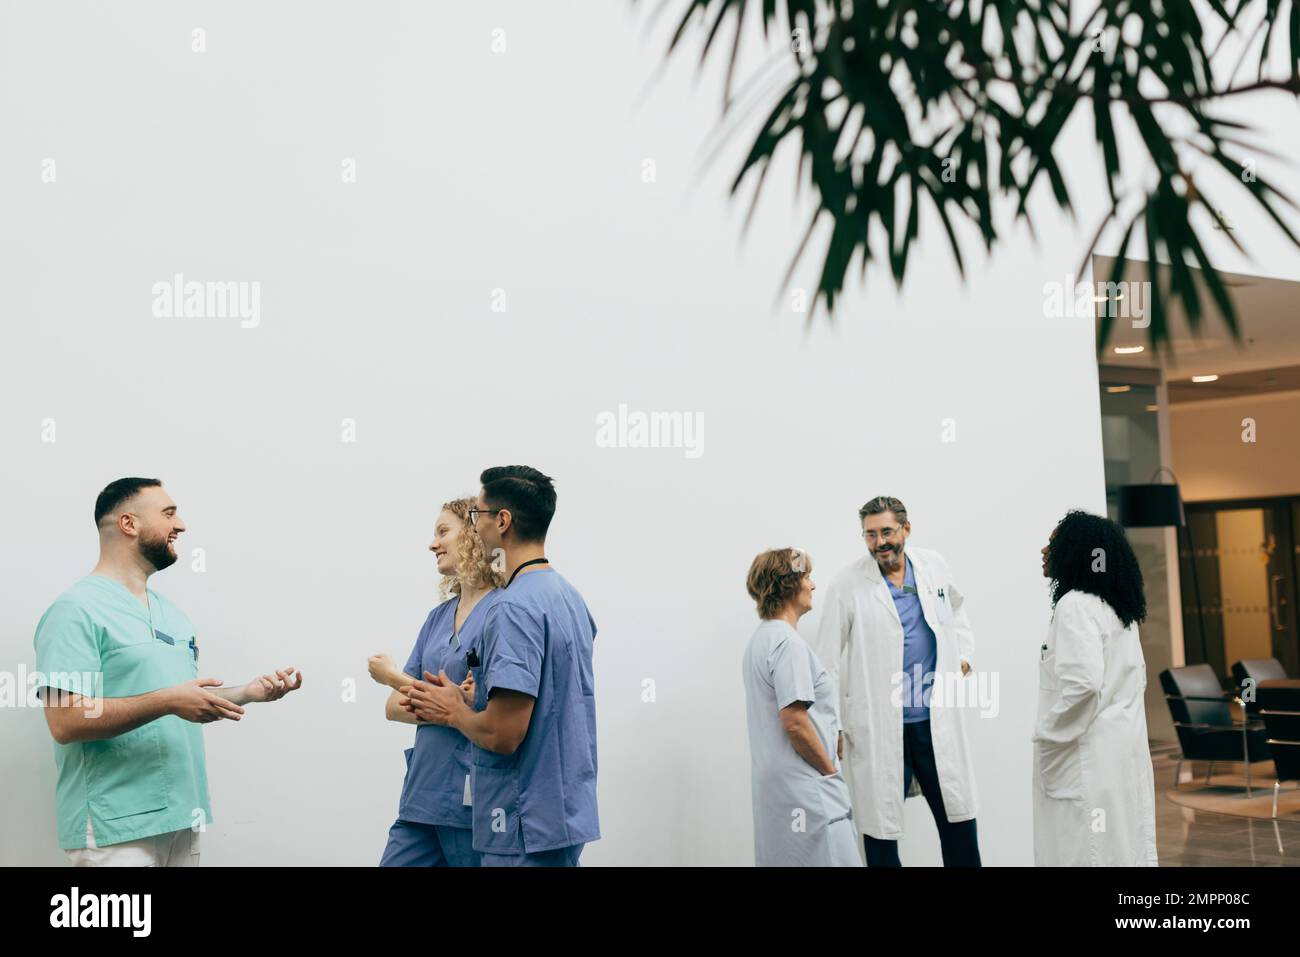 Team of male and female healthcare workers discussing with each other at hospital Stock Photo